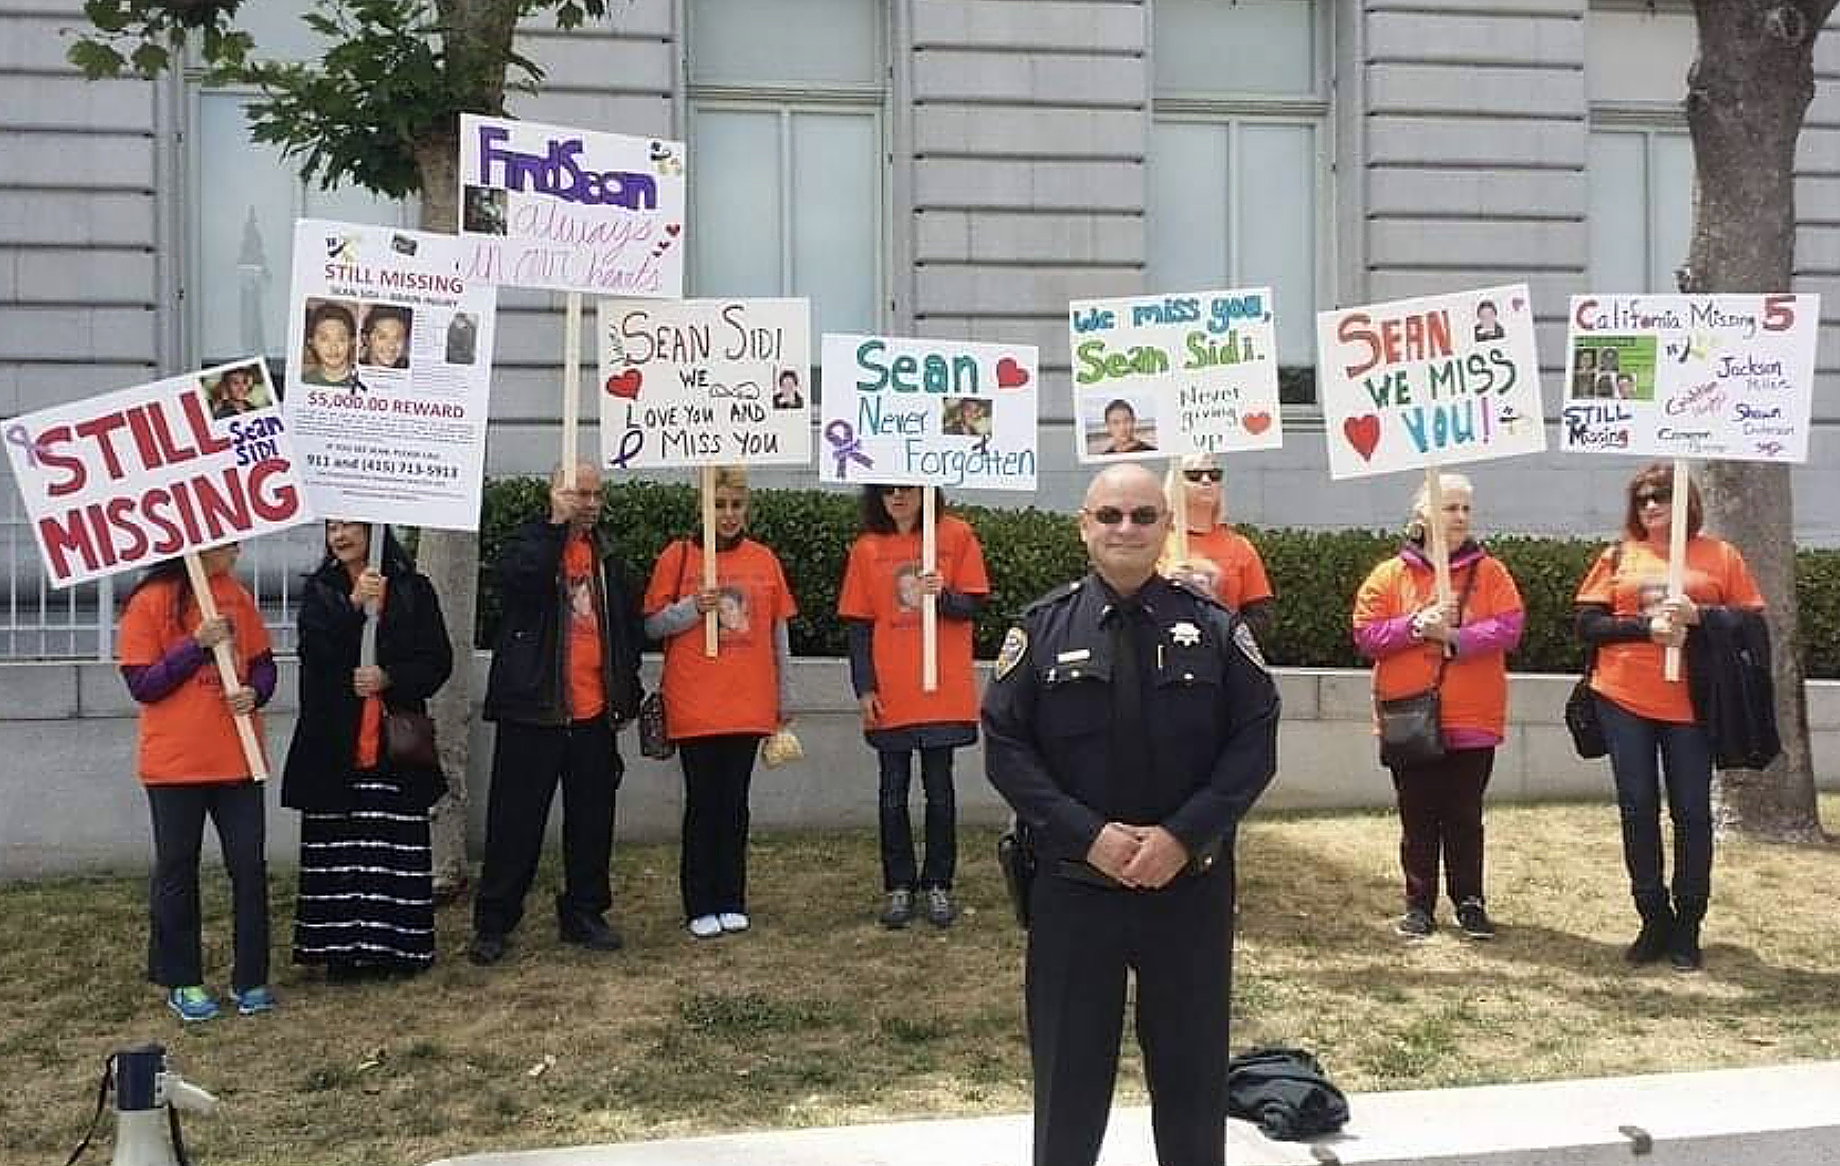 People hold signs seeking information about a missing person called Sean, as a uniformed officer stands in the foreground.